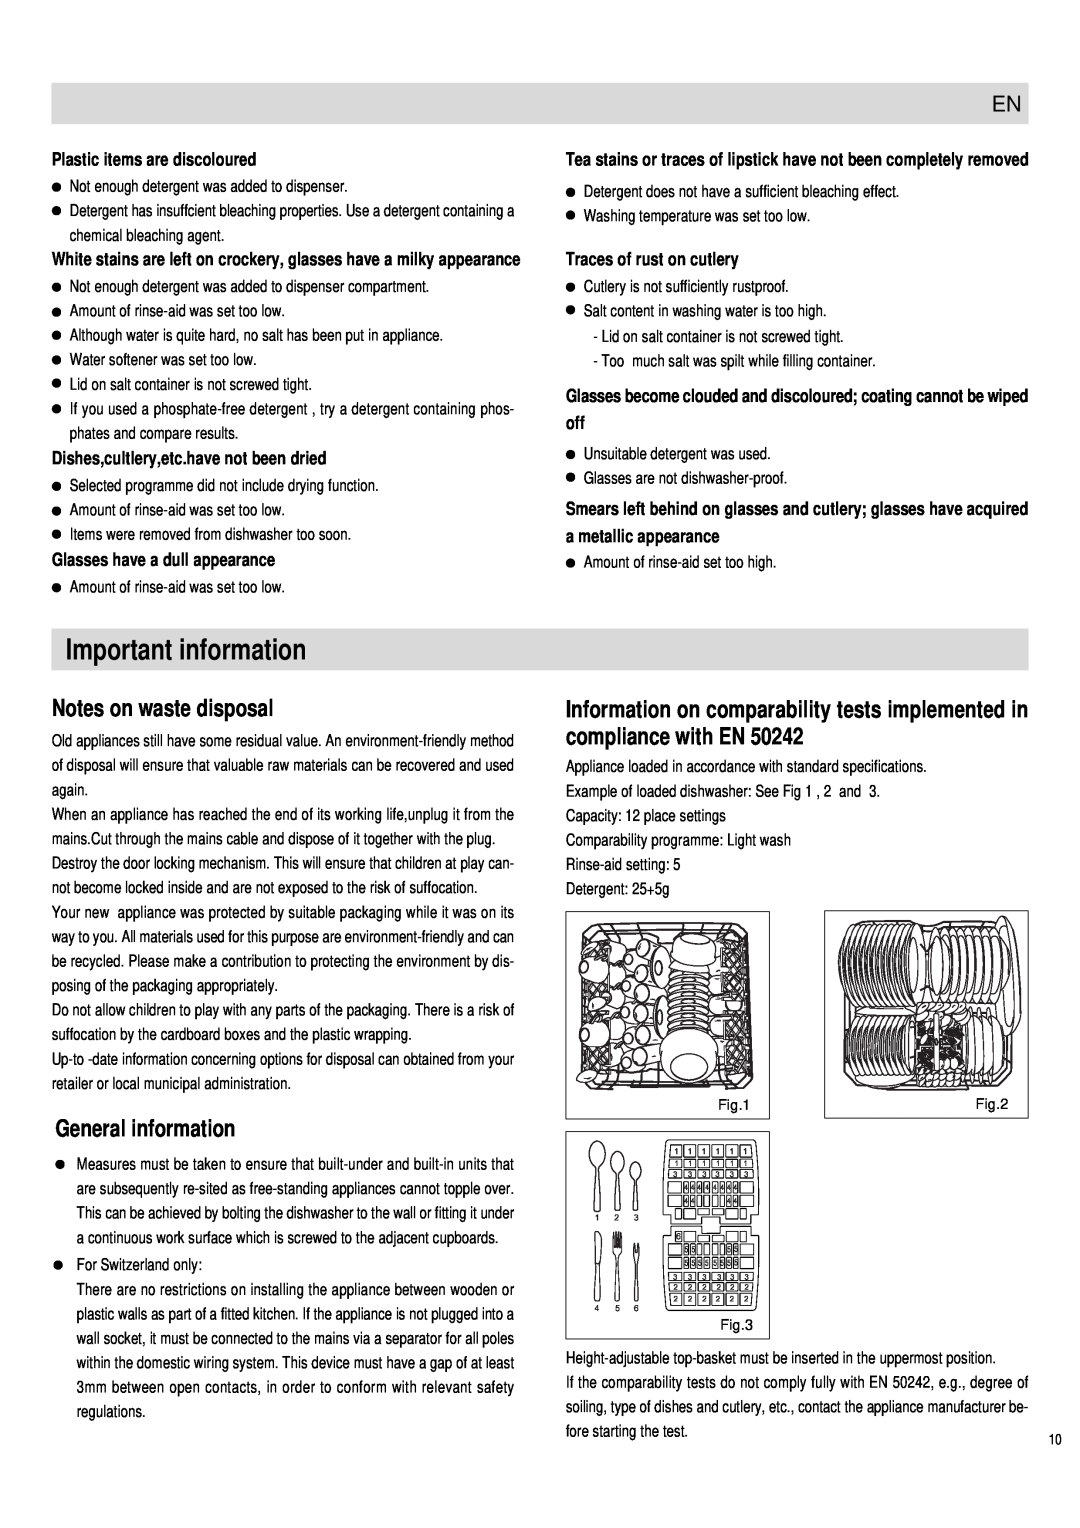 Haier DW12-PFE1 S, DW12-PFE1 ME manual Important information, Notes on waste disposal, General information 